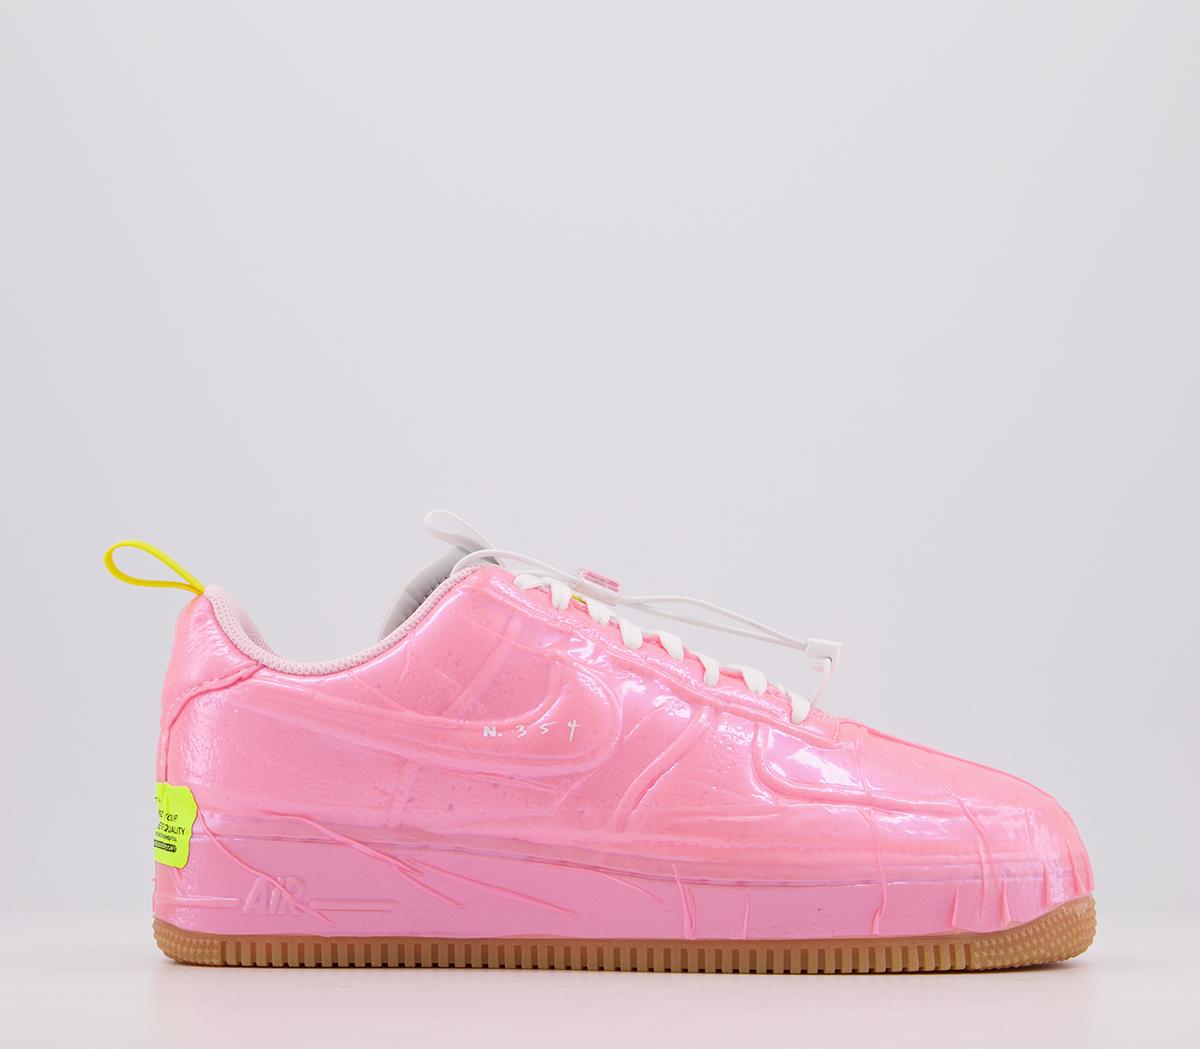 NikeAir Force 1 Experimental TrainersRacer Pink Artic Punch Sail